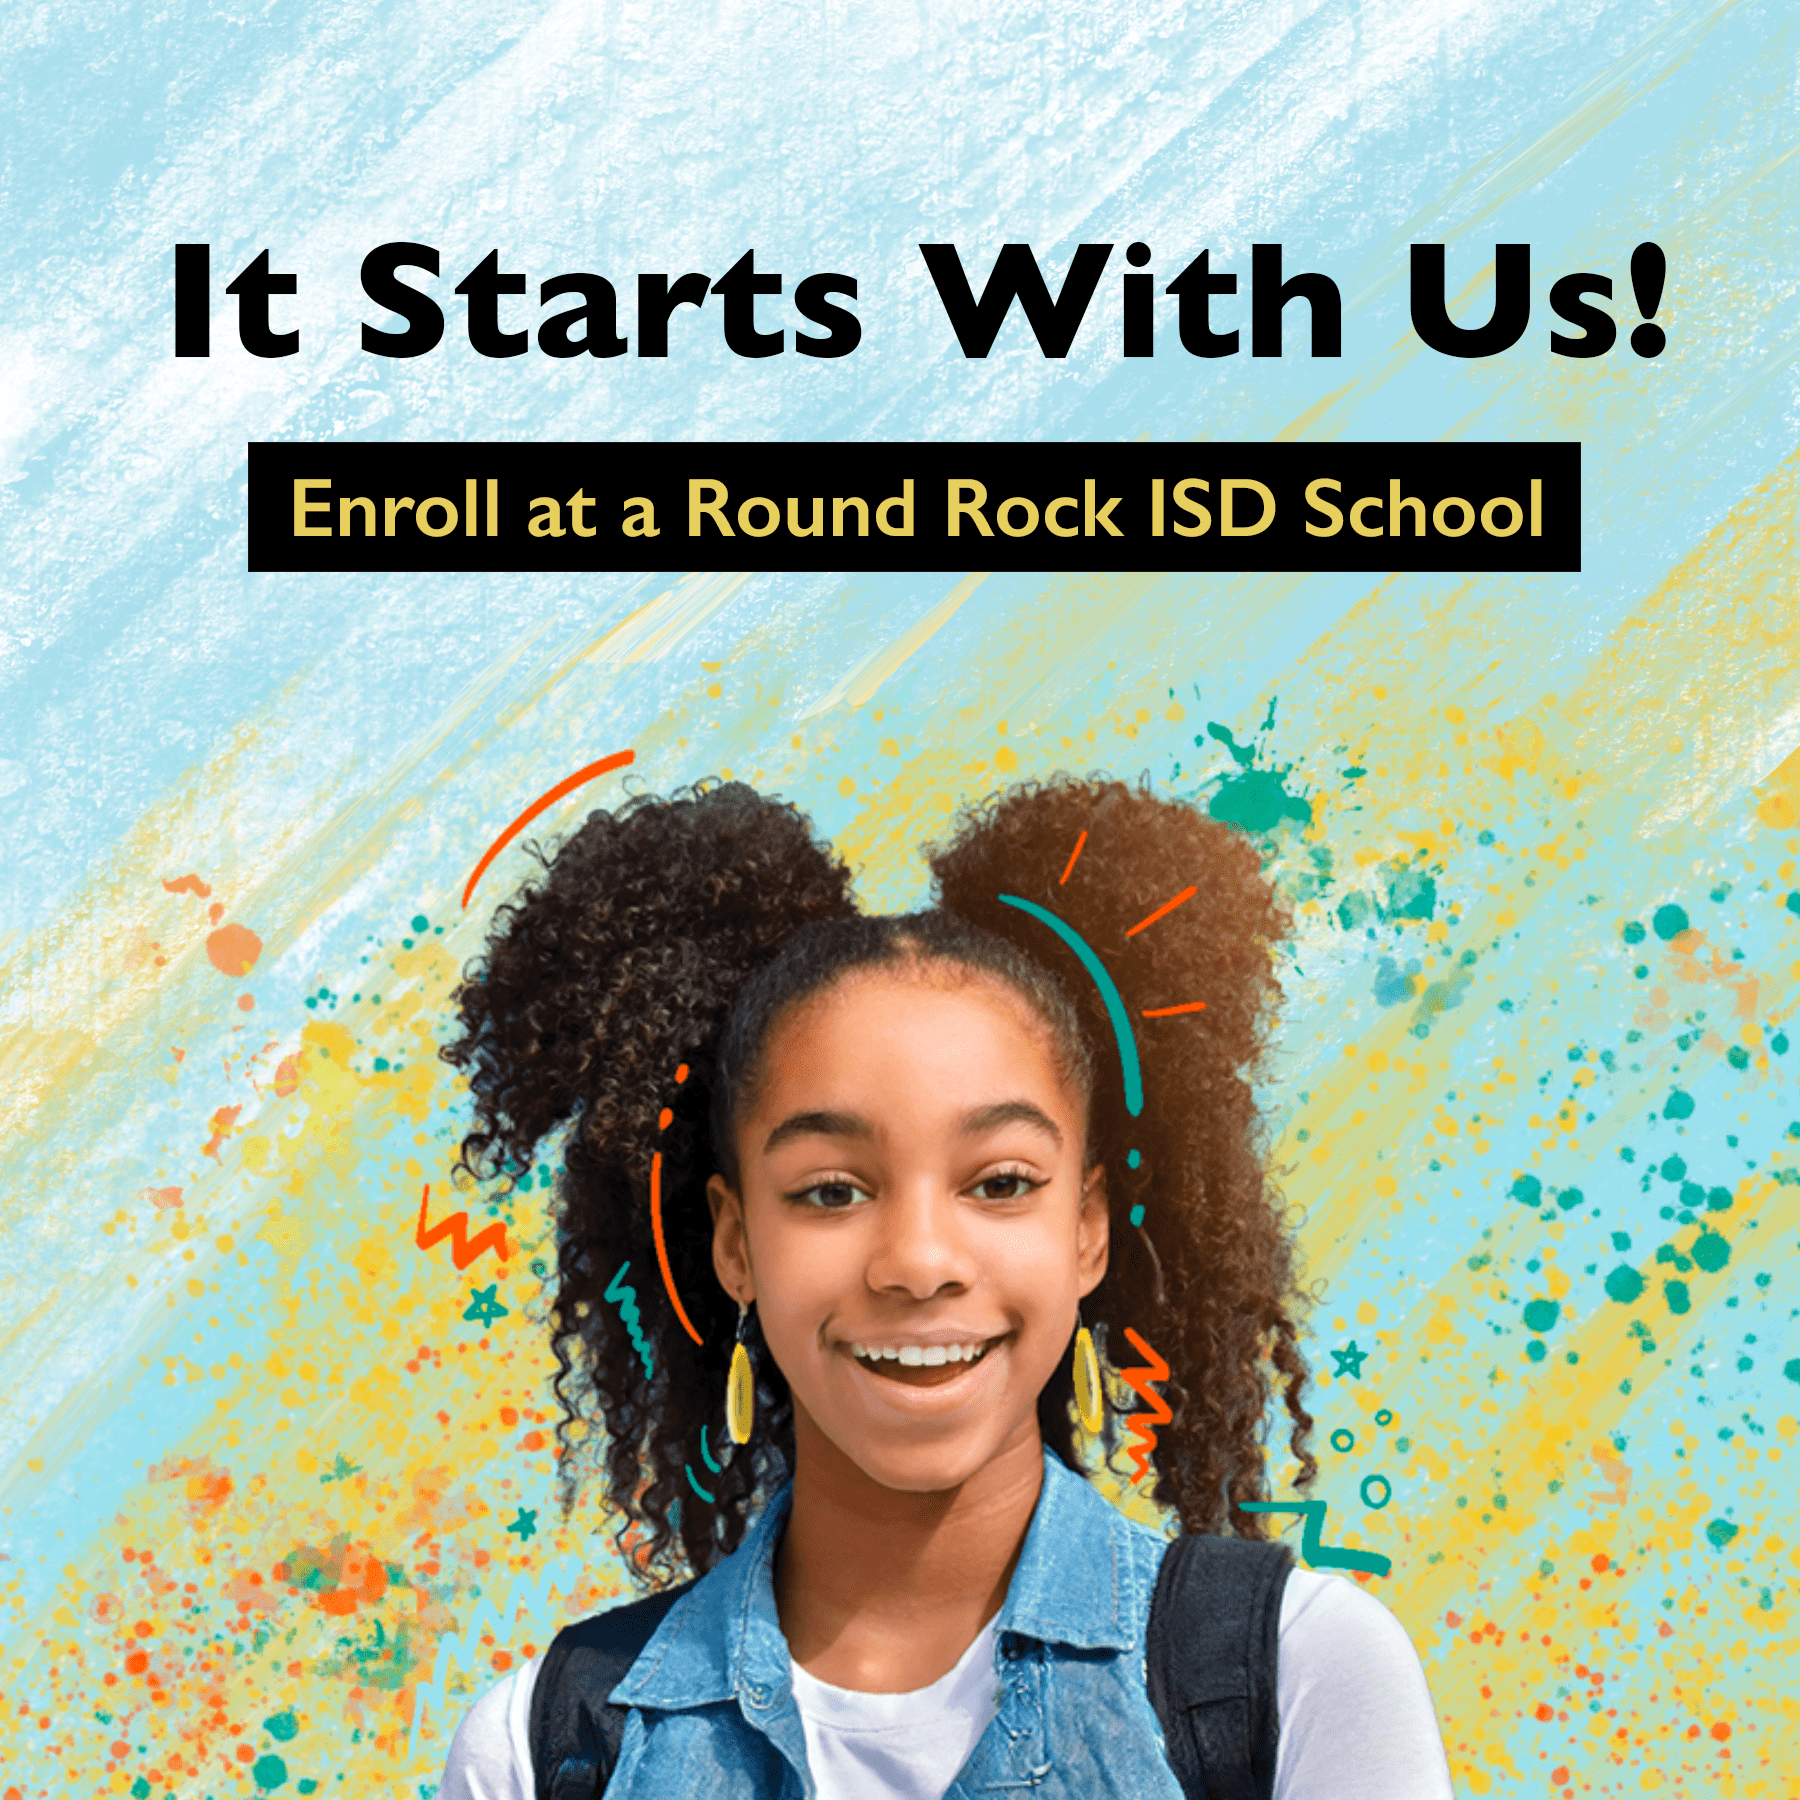 It Starts With Us! Enroll at a Round Rock ISD School